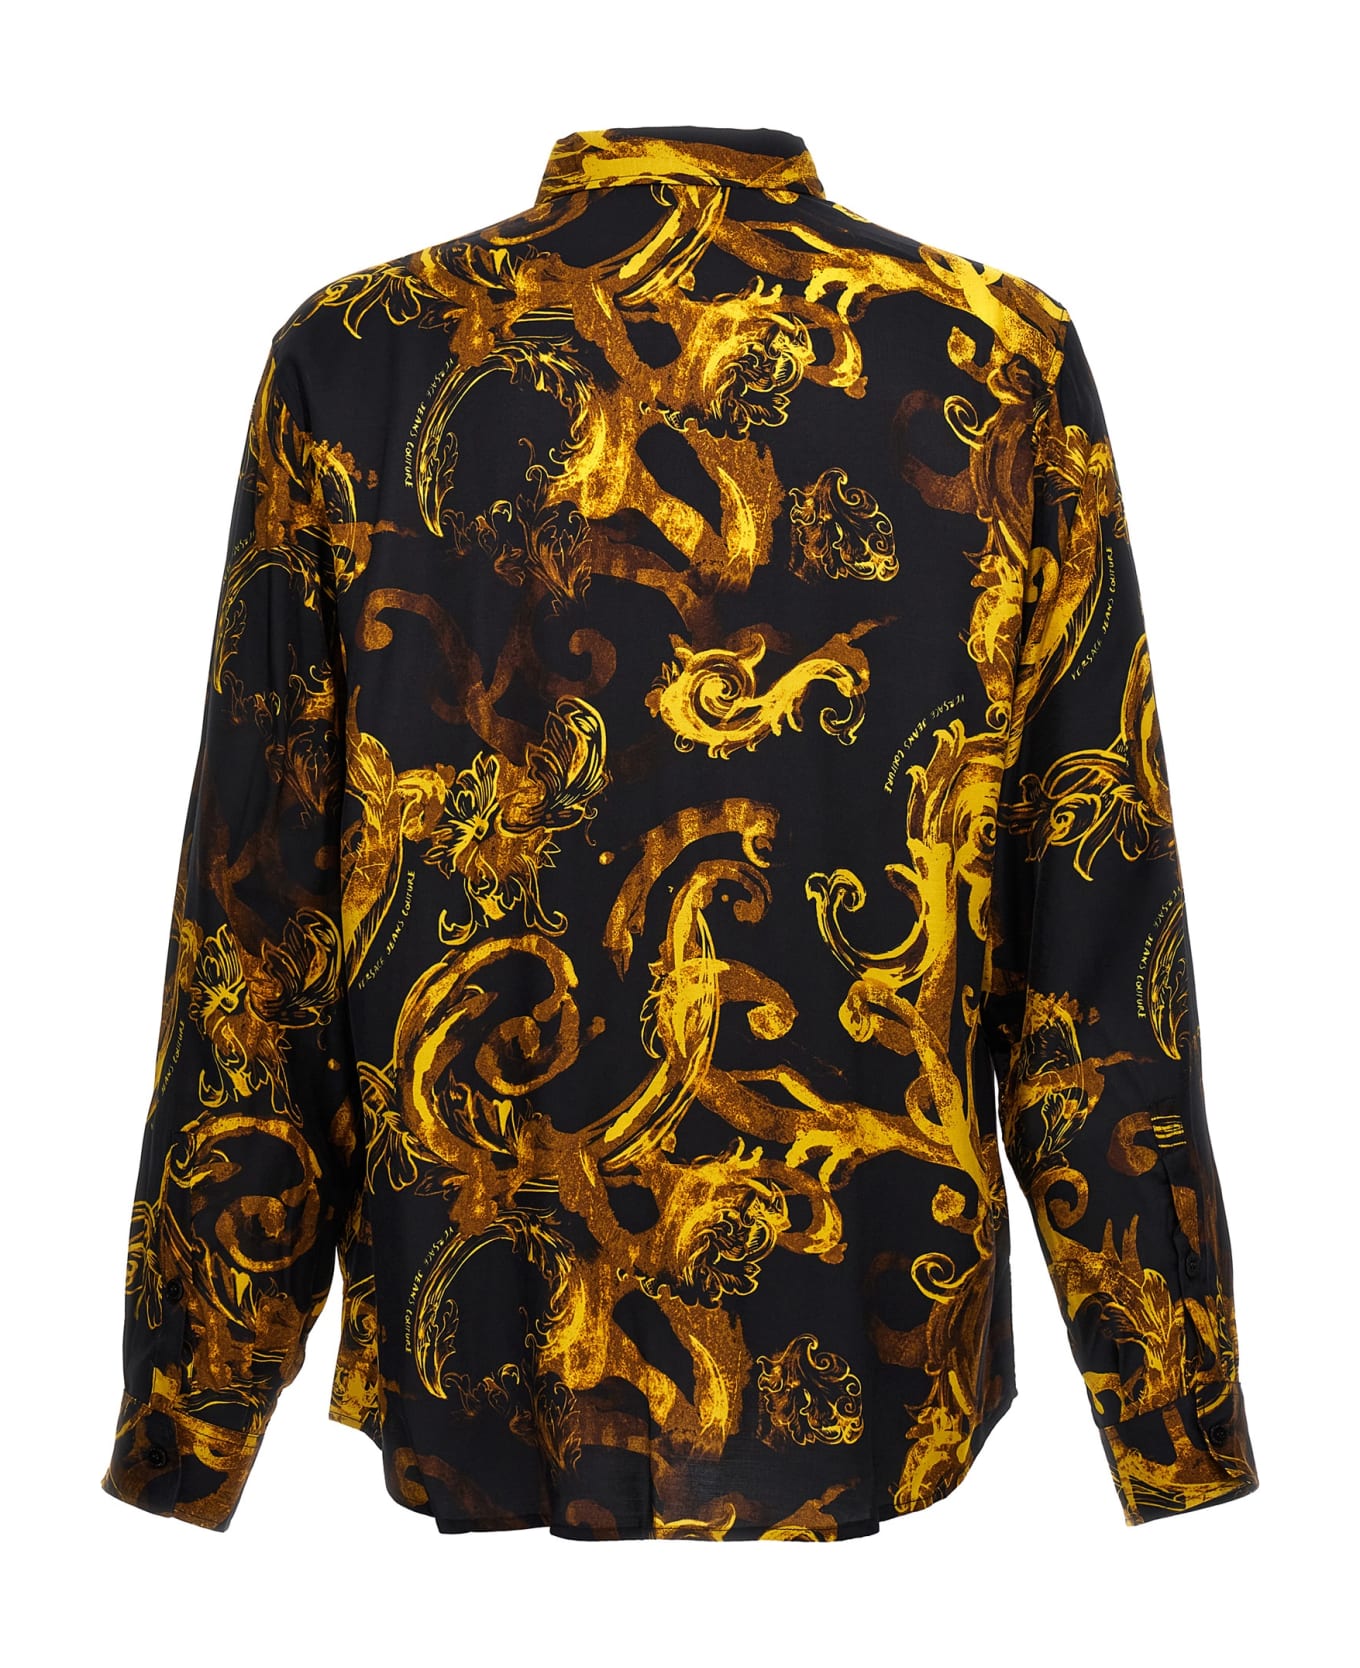 Versace Jeans Couture All Over Print Shirt - Multicolor シャツ